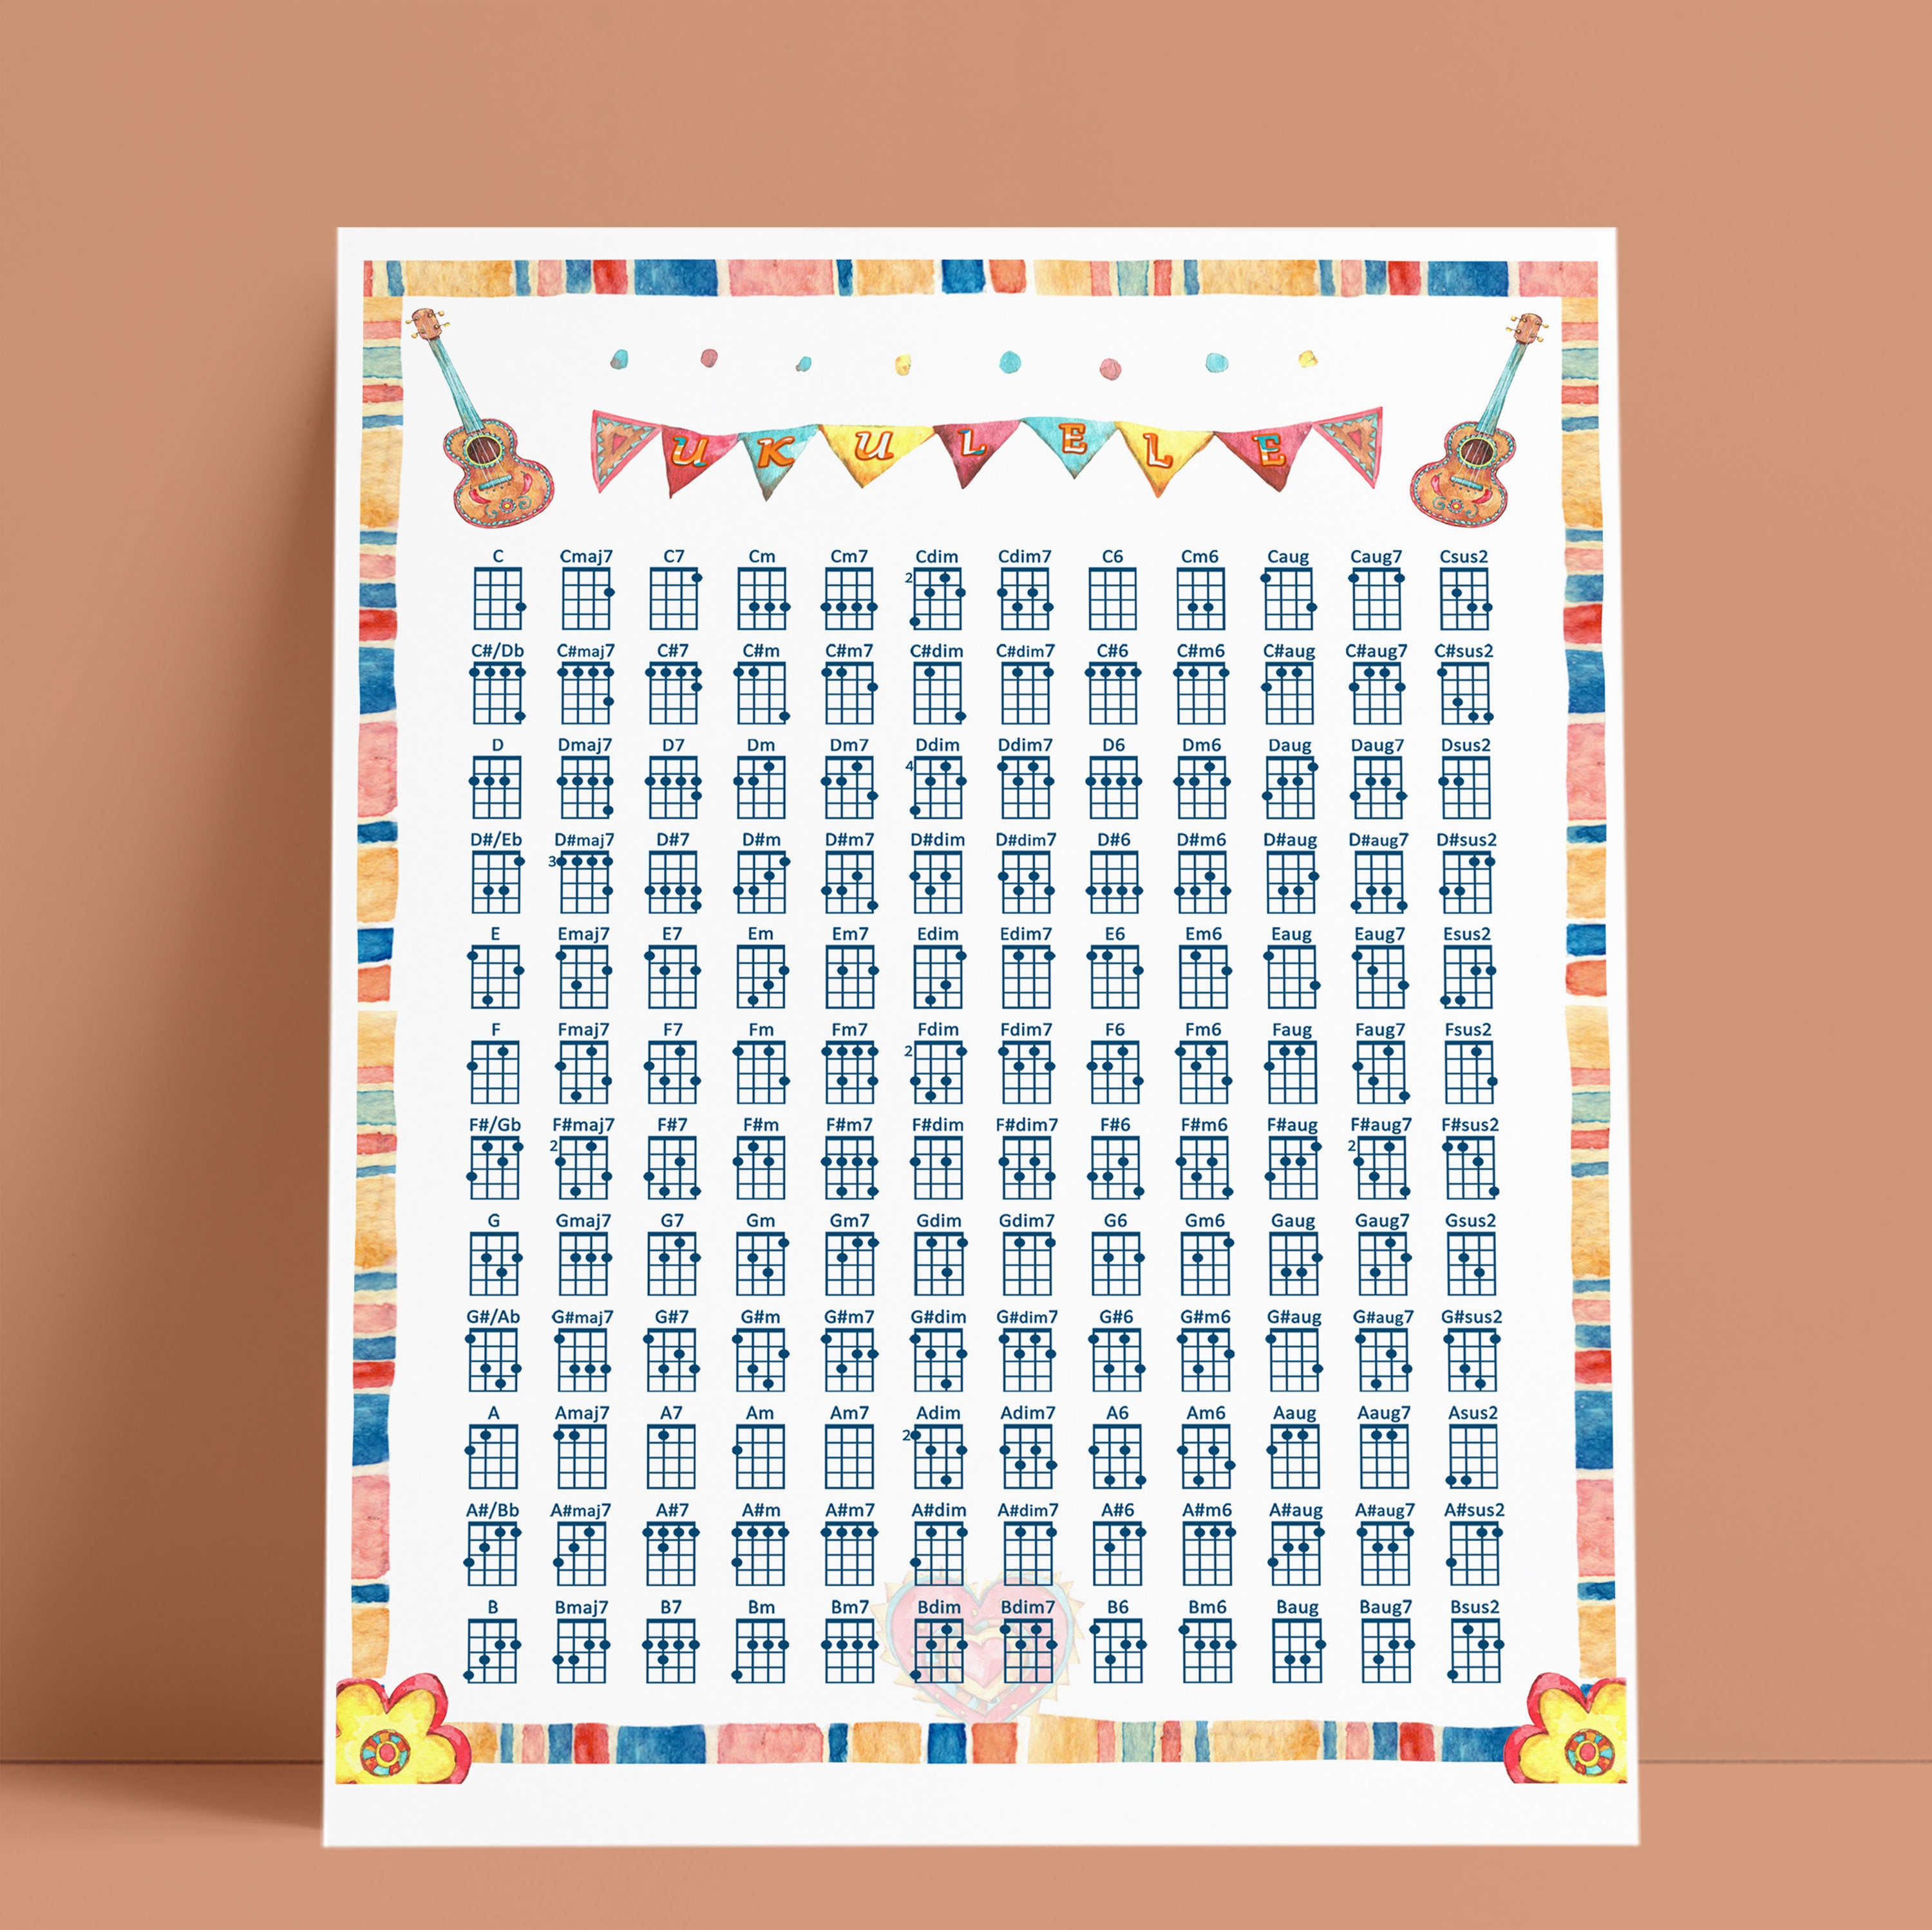 Ukulele Chords Chart Ukulele Chords Chart Ukulele Learning Music Mexican Theme Border Wall Art Poster Prints Digital Art Download